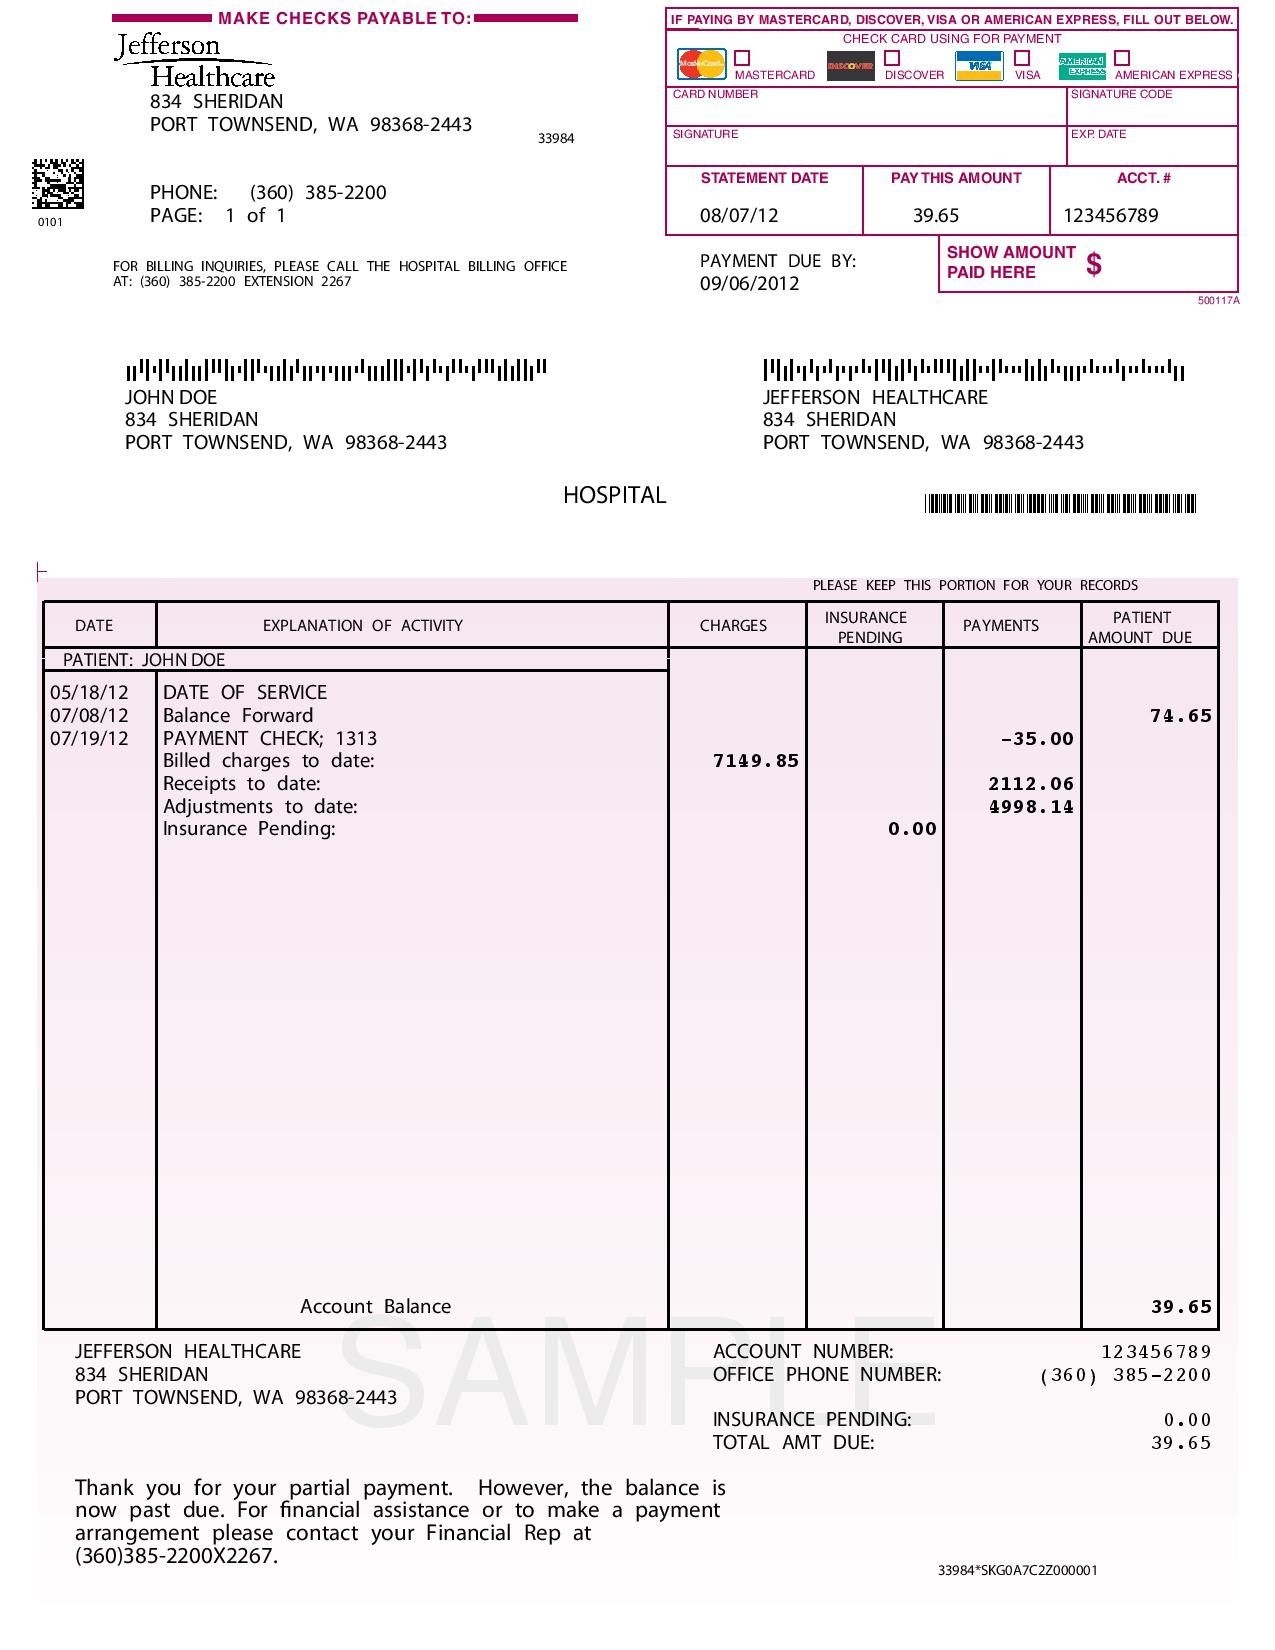 Sample Of Payment Invoice